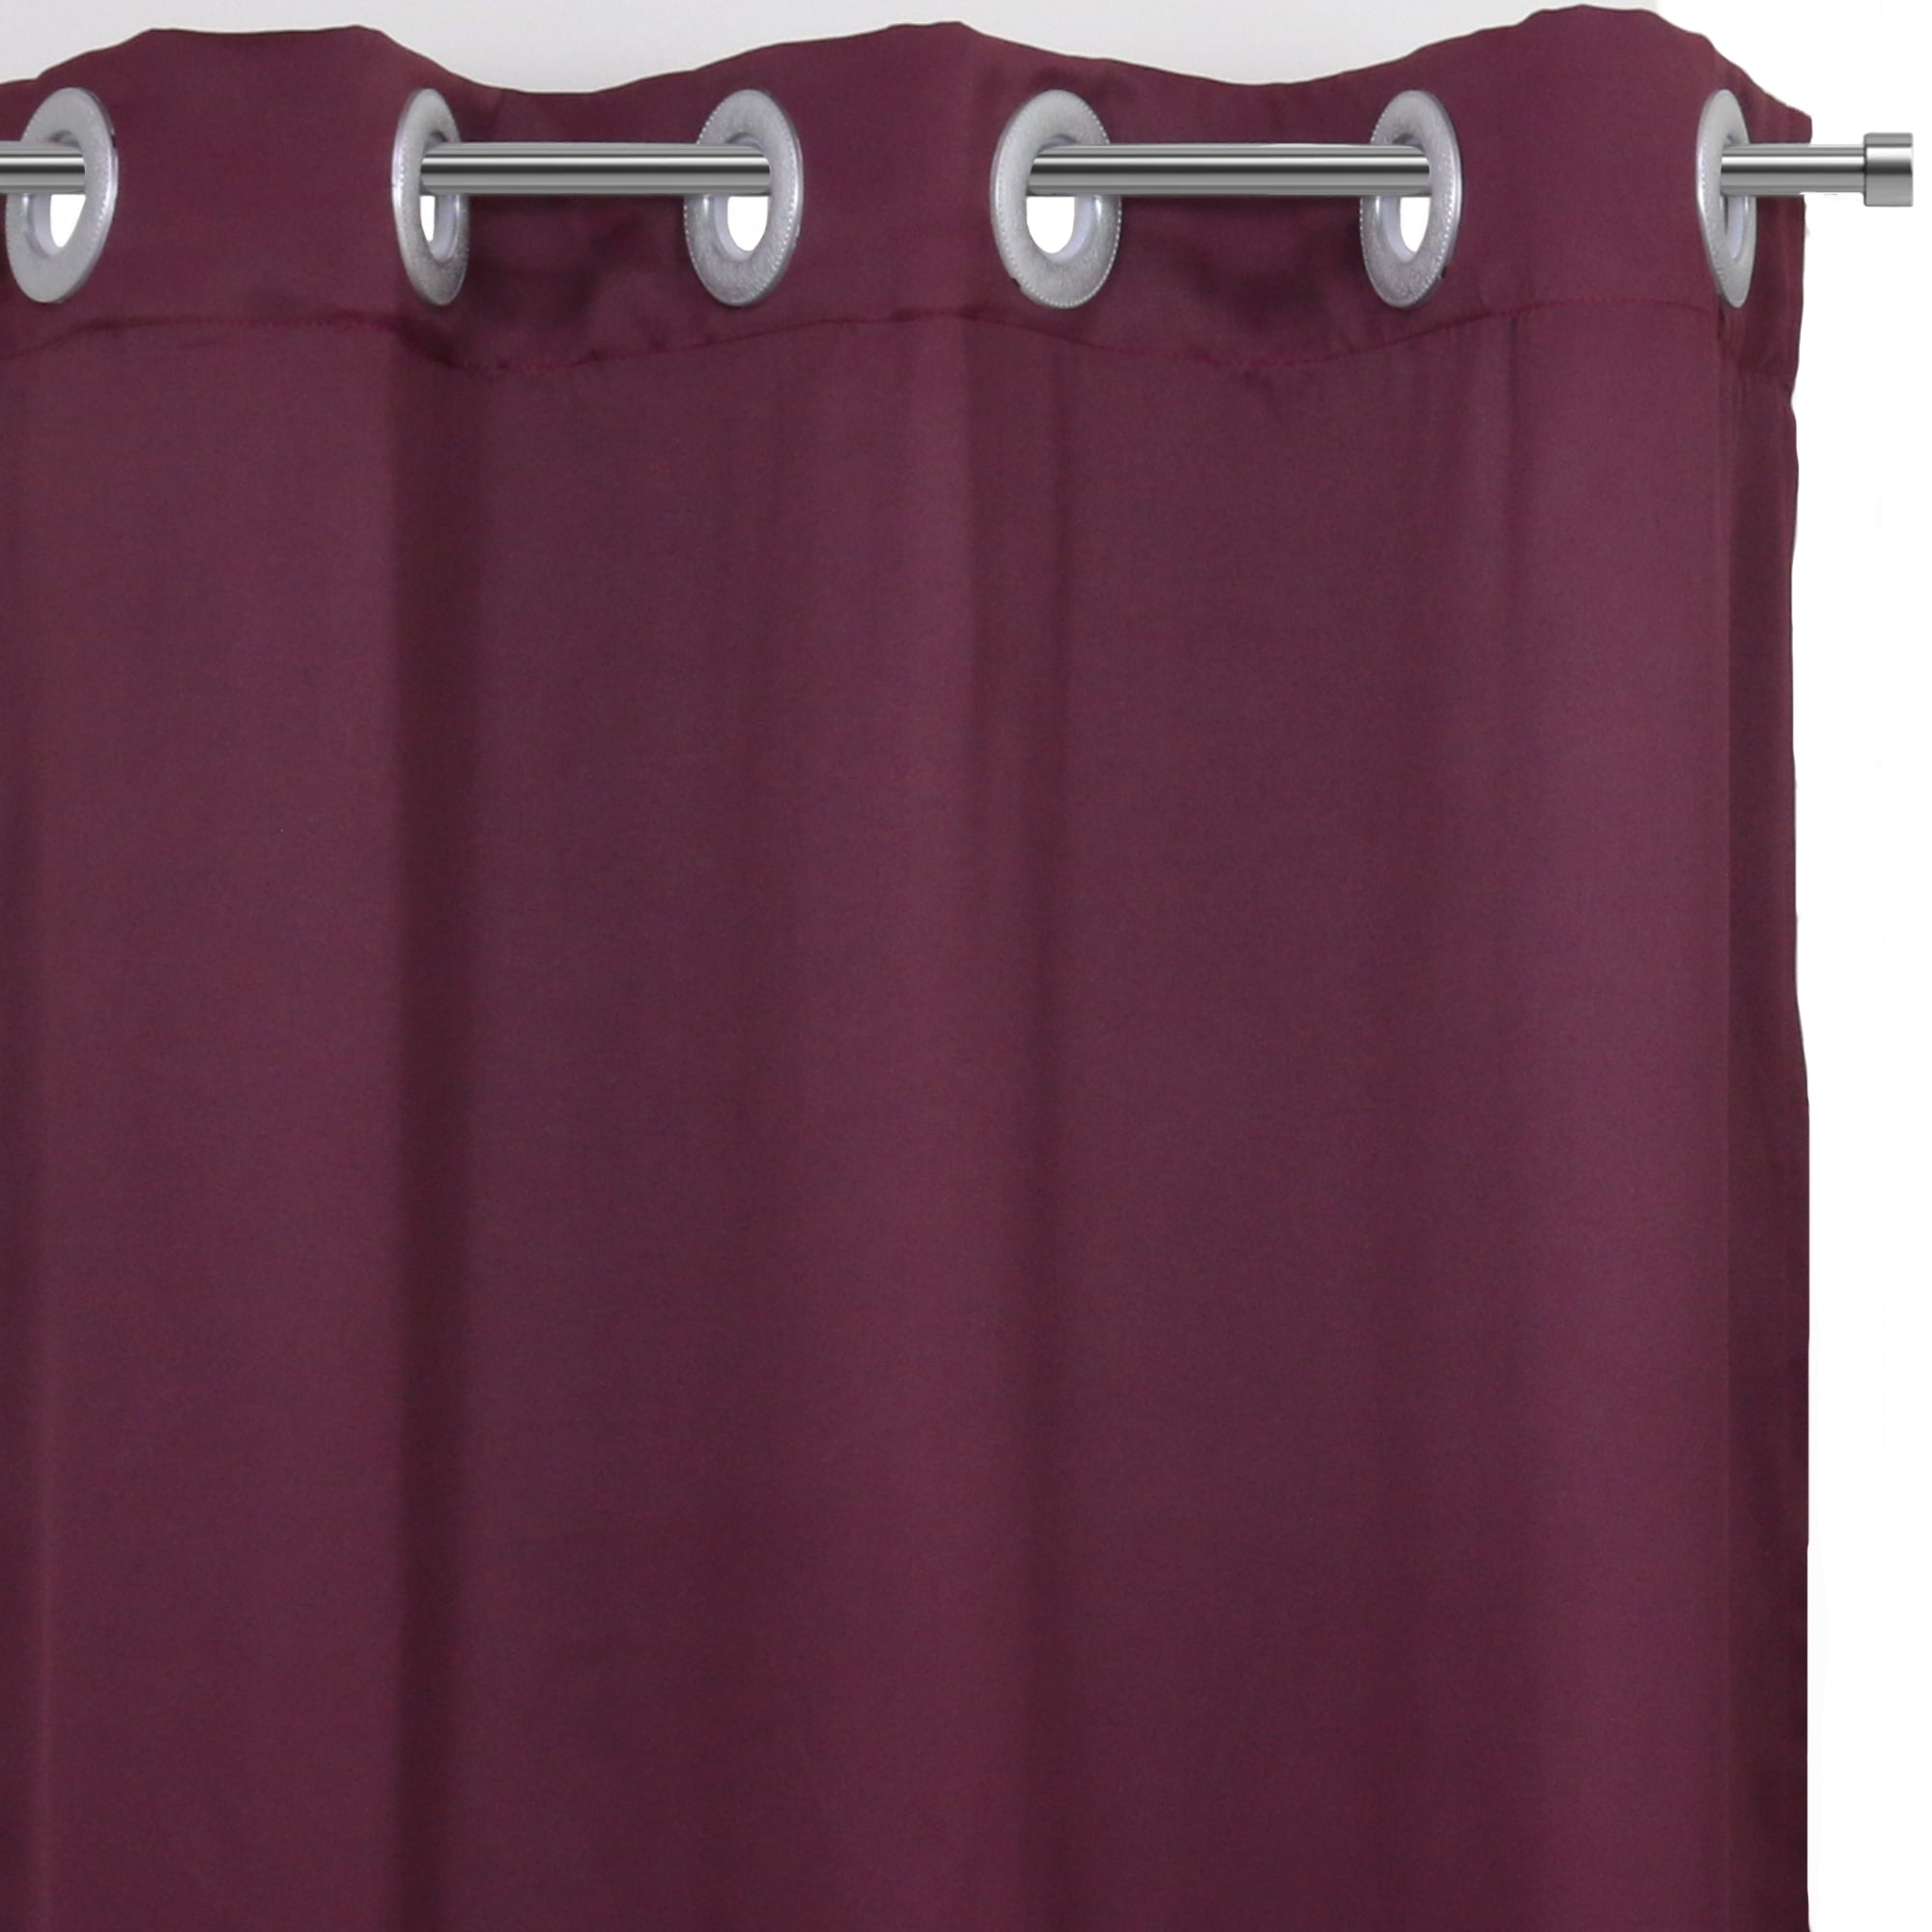 52 X 63 Inch Blackout Polyester Curtains with Grommets Hunter Green - 2  Panels